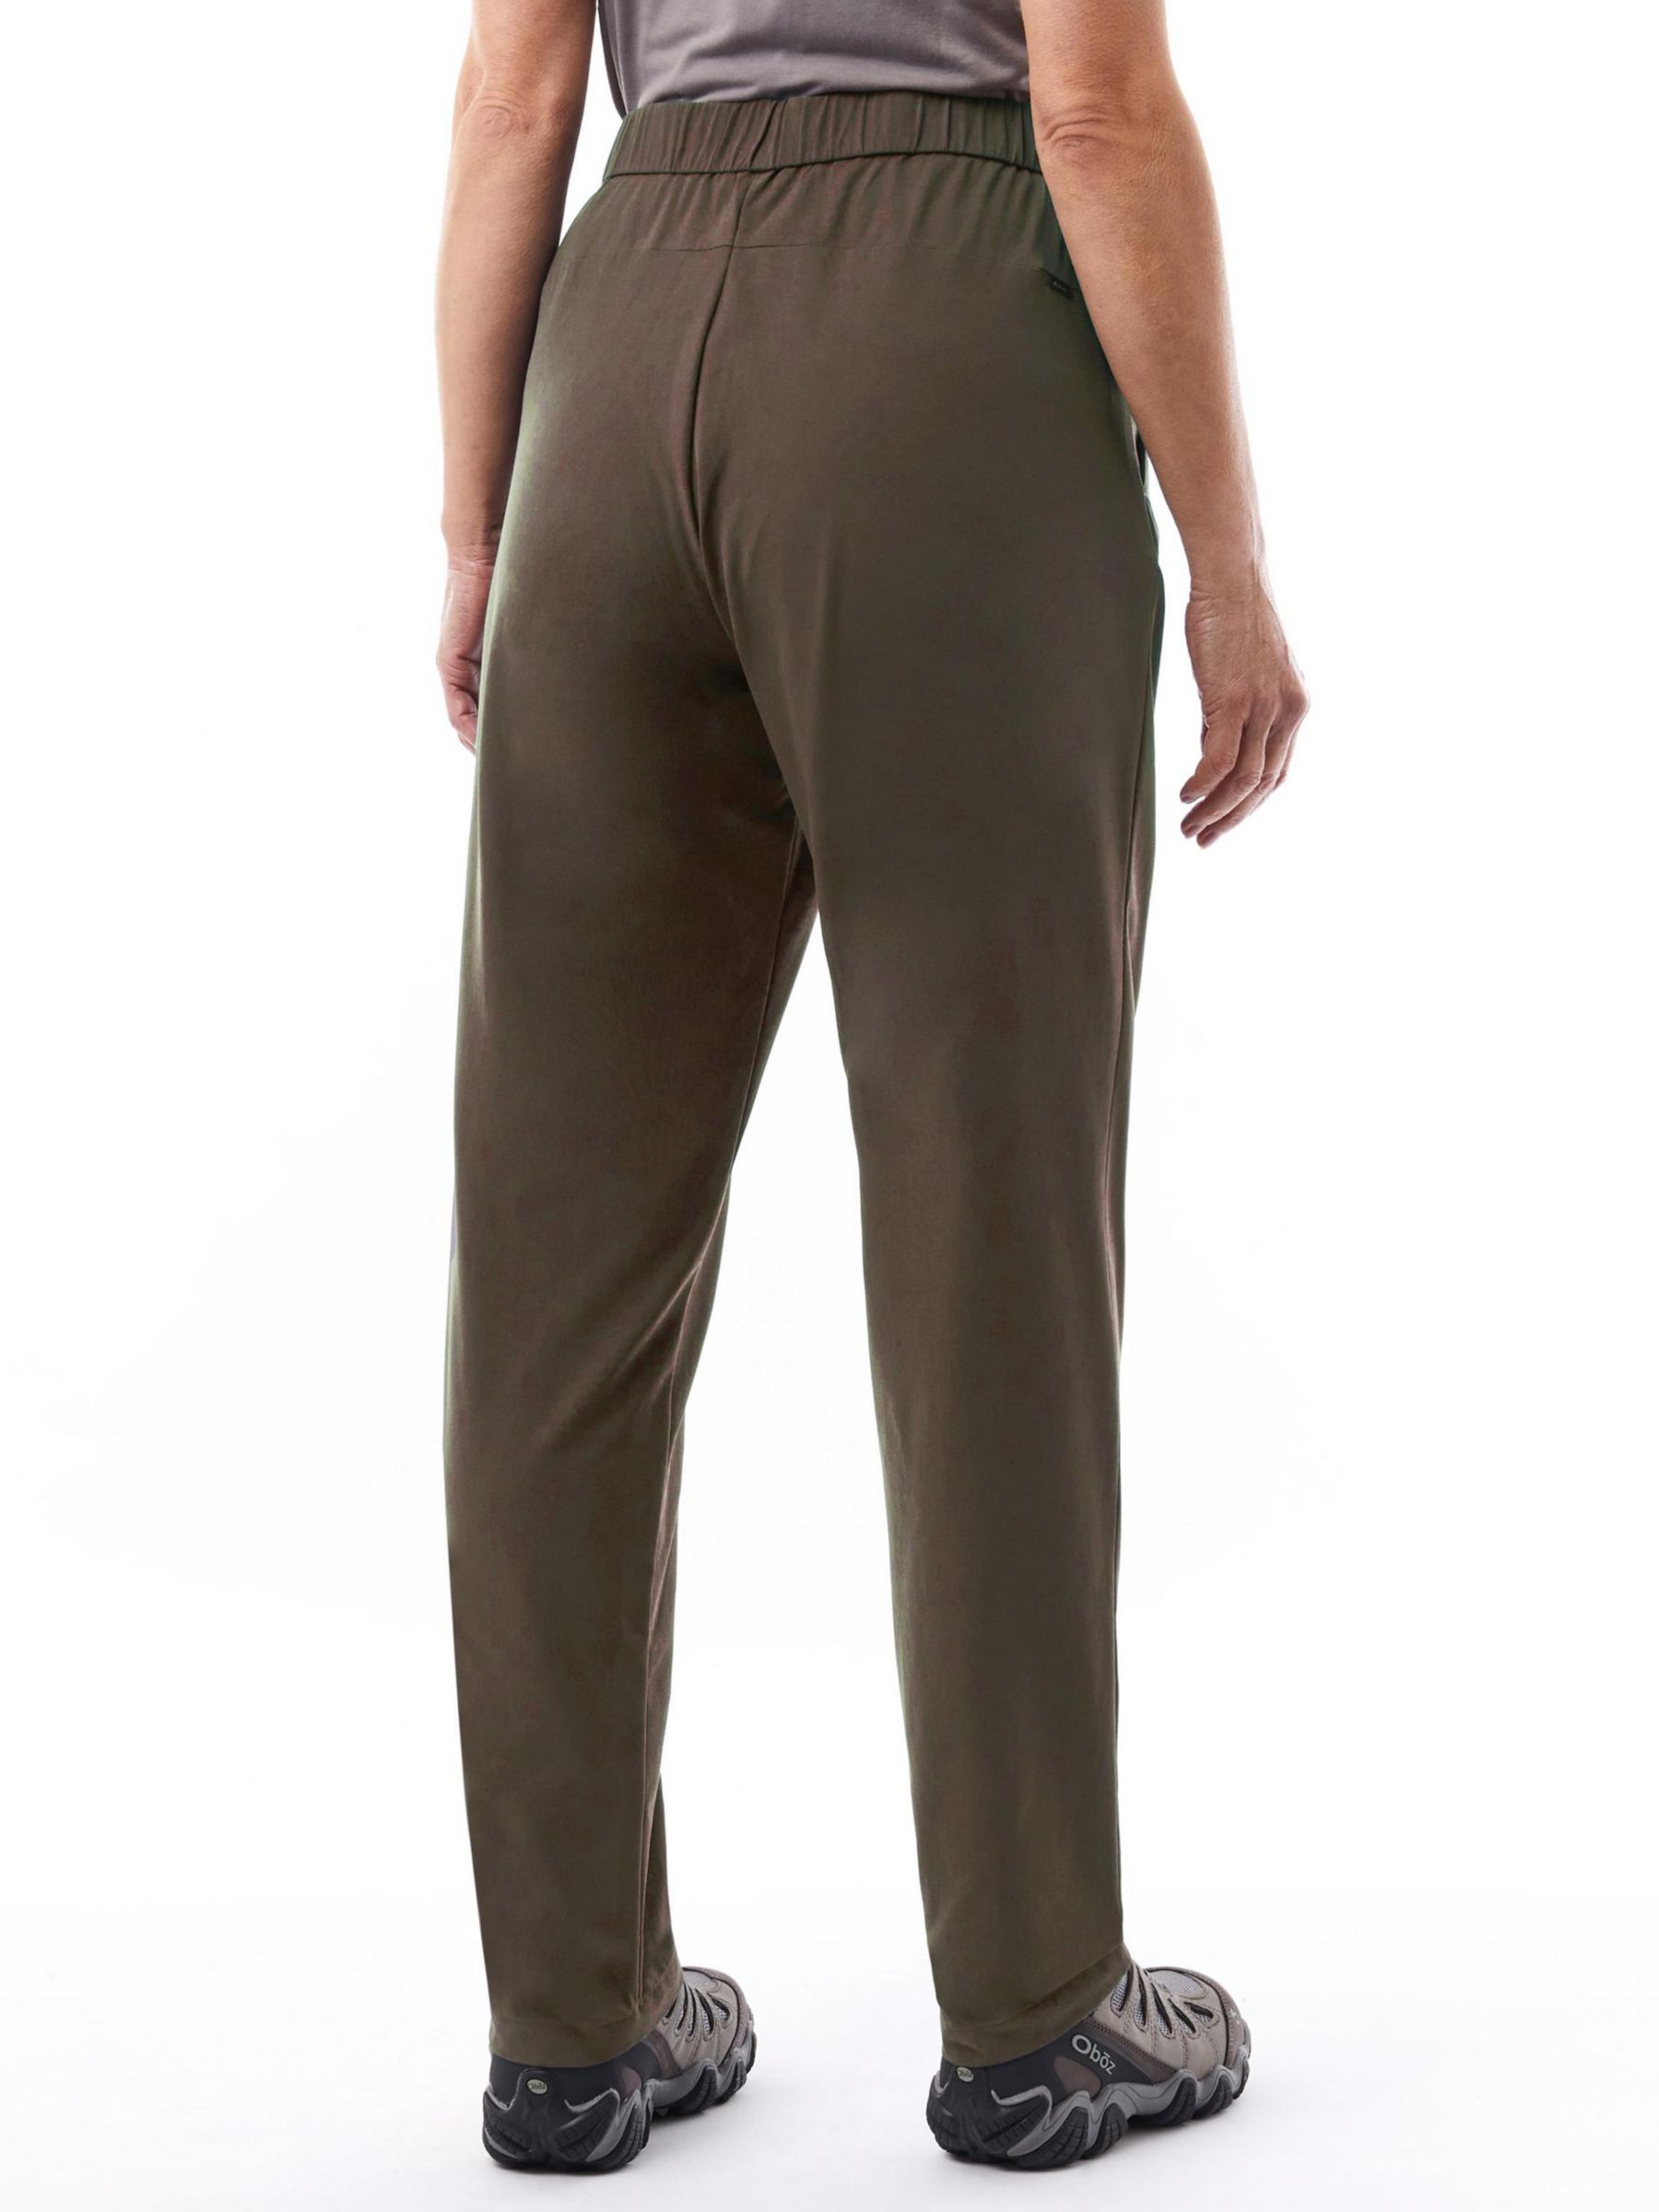 Rohan Riviera Stretch Trousers, Ash Brown at John Lewis & Partners